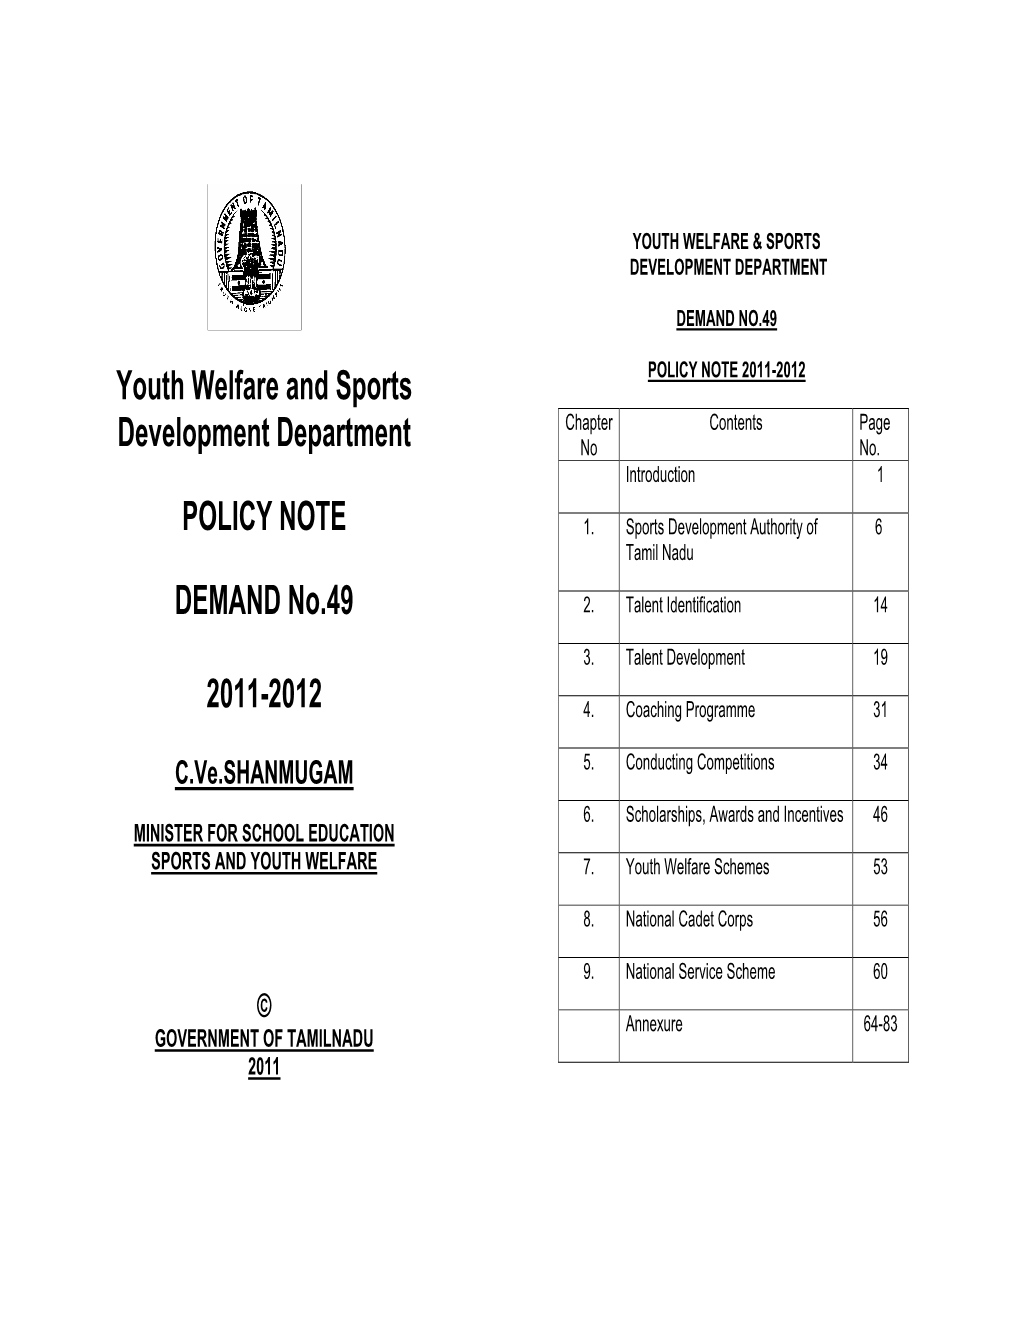 Youth Welfare and Sports Development Department POLICY